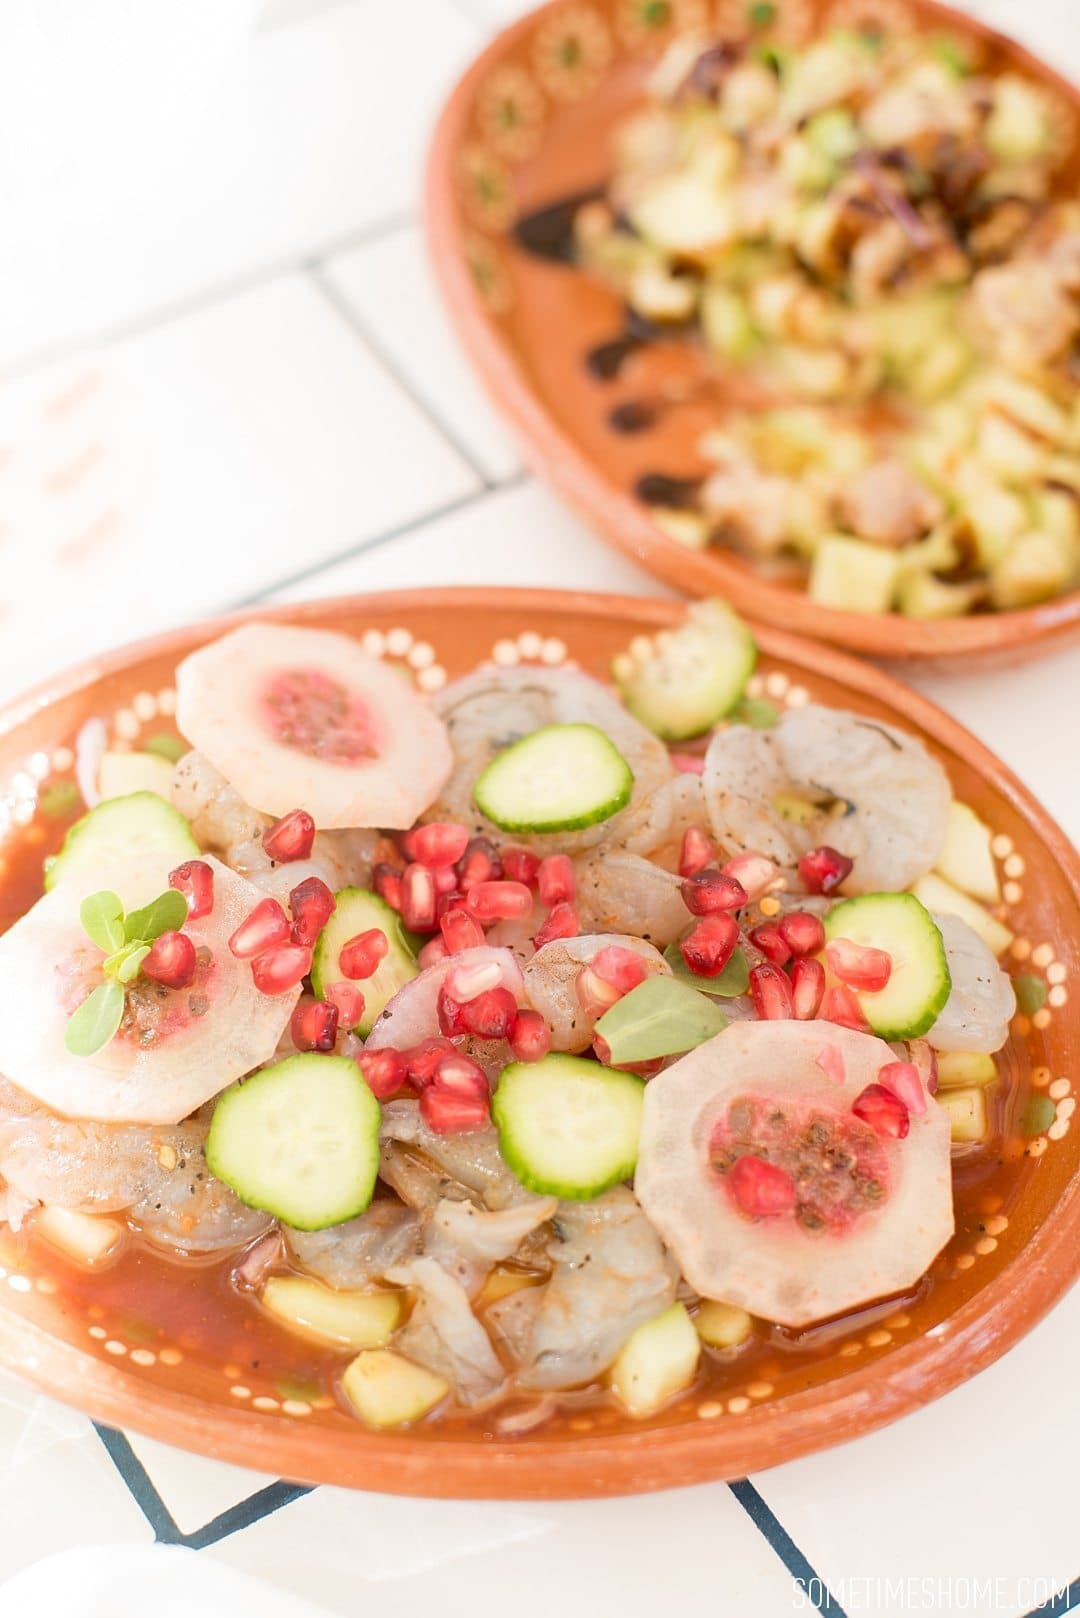 Travel photos and ideas in Tijauna, Mexico with hipster spot Telefonica Gastropark food truck foodie scene on Sometimes Home blog with ceviche image.